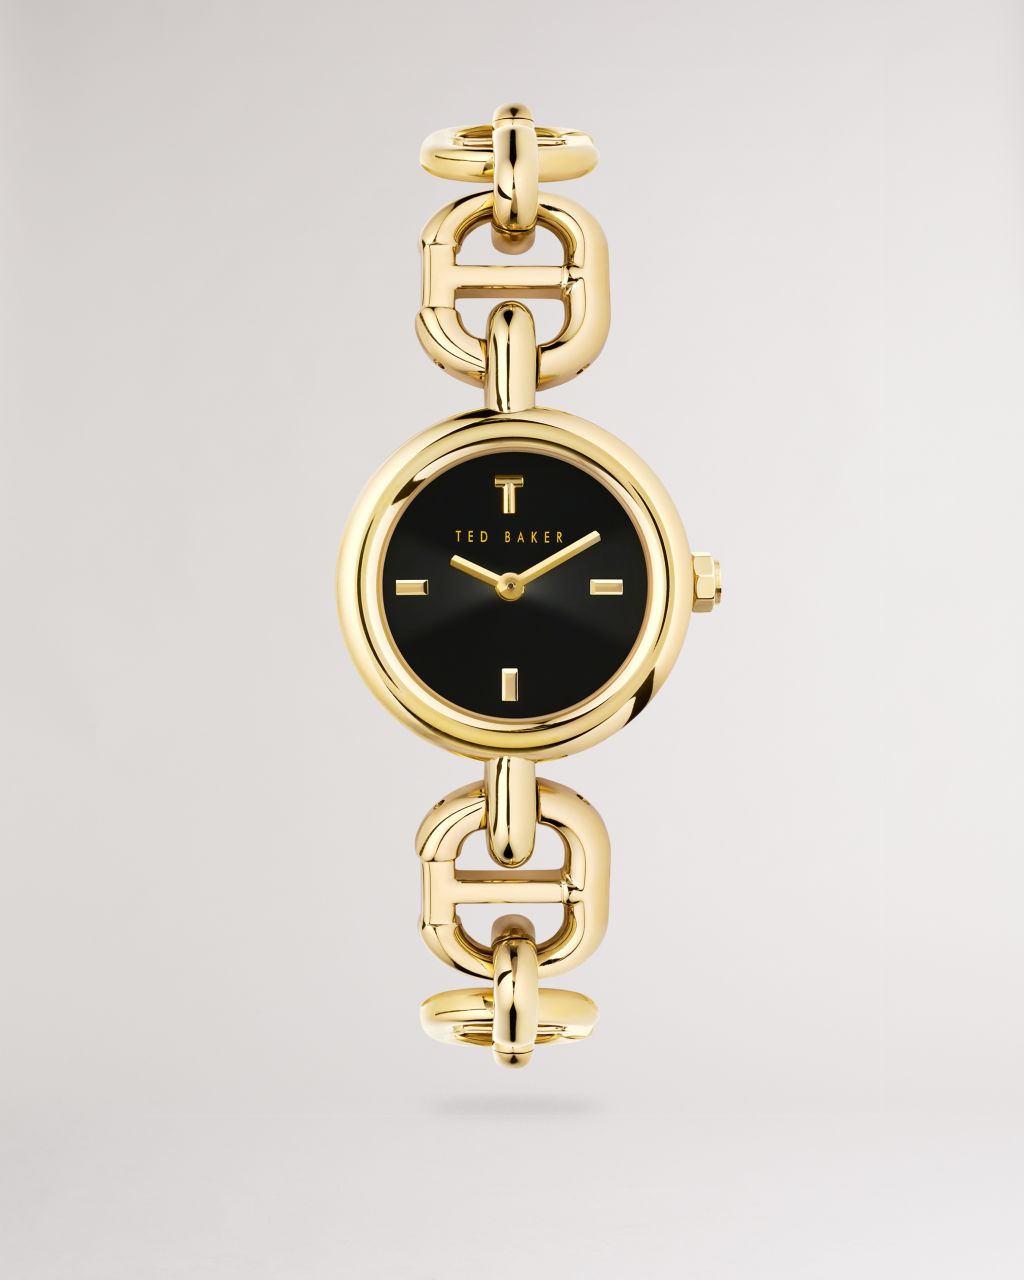 Ted Baker Women's Chain Bracelet Watch in Gold Color, Maarge